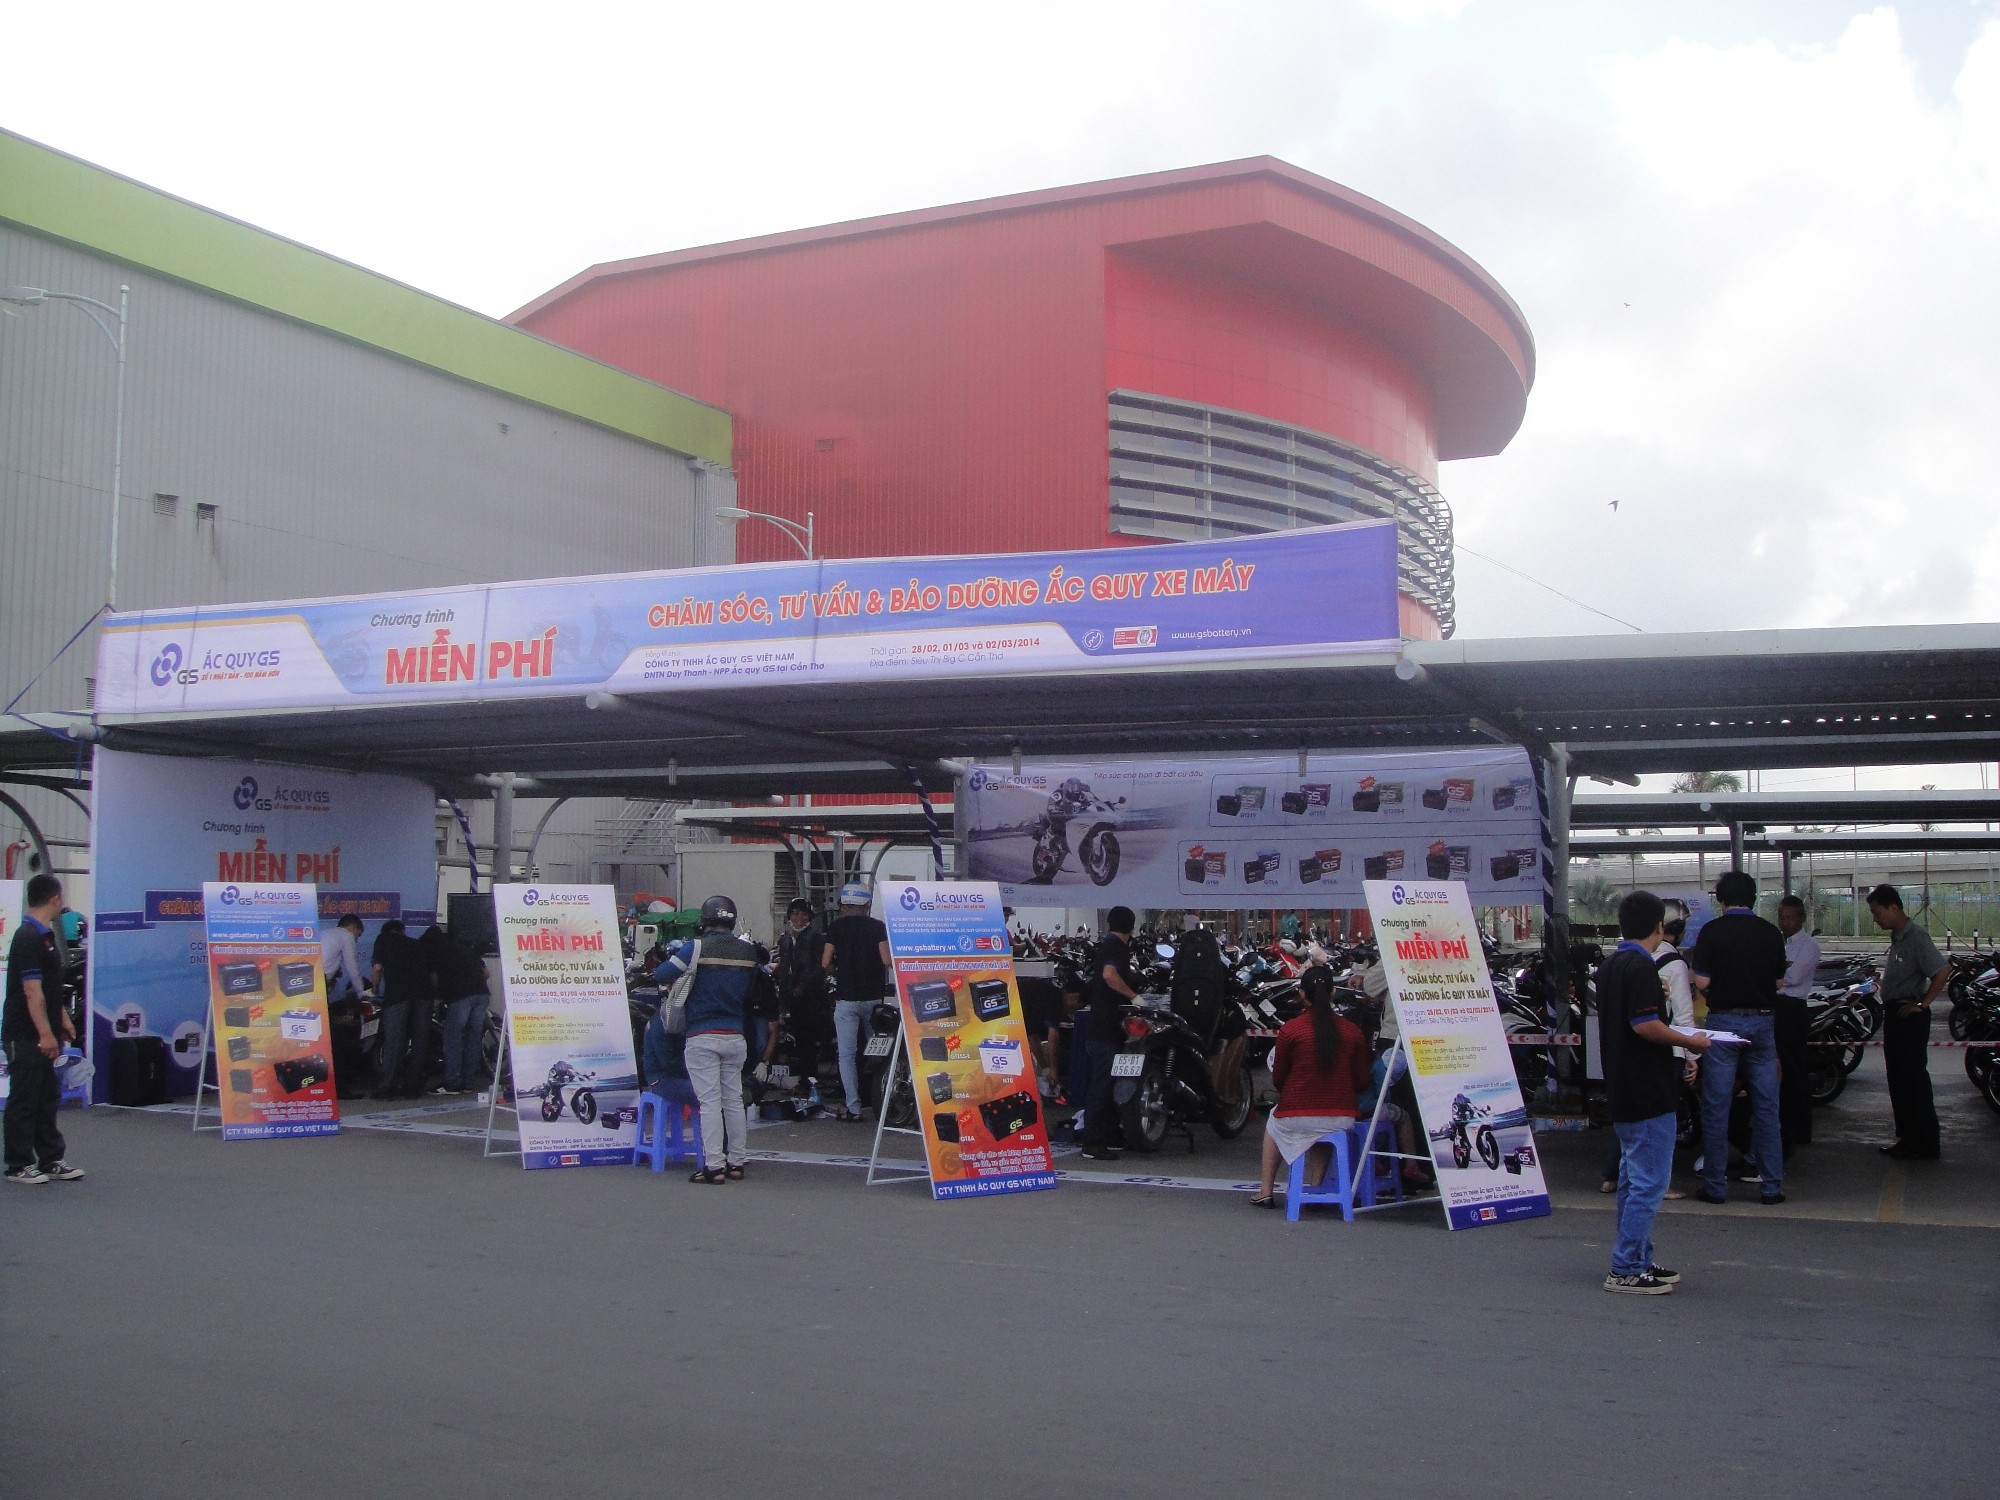 GSV HELD EVENT FREE “TAKE CARE, CONSULT & MAINTENANCE BATTERY OF MOTORBIKE” IN CAN THO